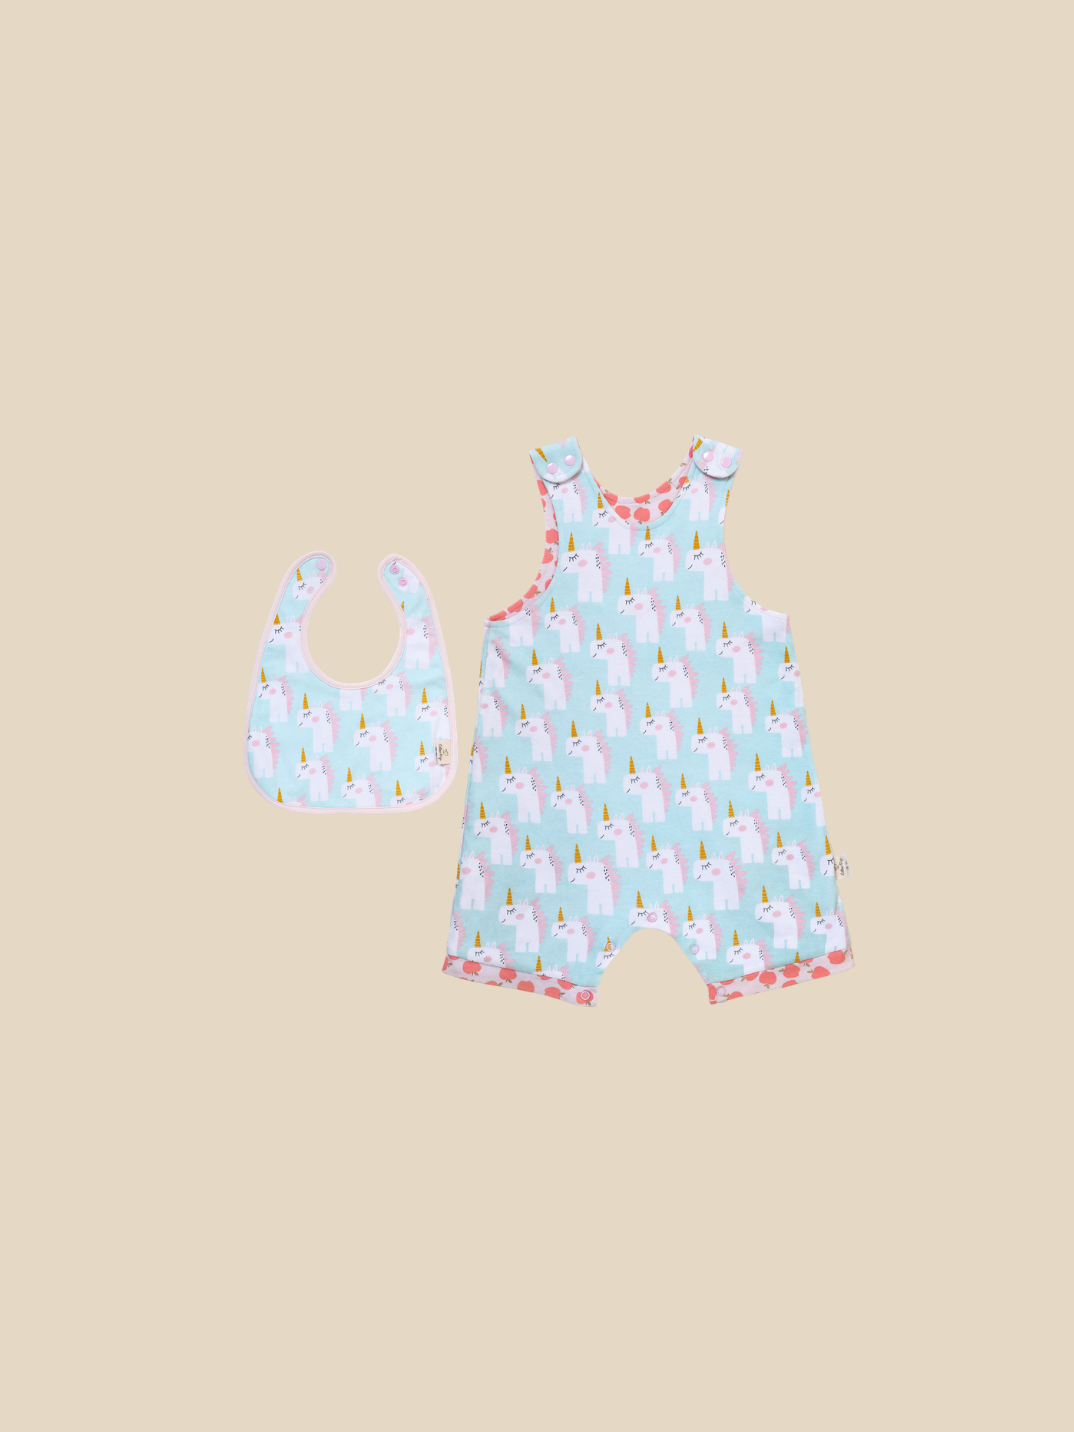 This adorable gift set comes with: 1x organic cotton reversible romper and 1x organic cotton reversible bib. All of our gift sets come with complimentary gift wrapping services. A unicorn and apples pattern that's unisex. Shop now.